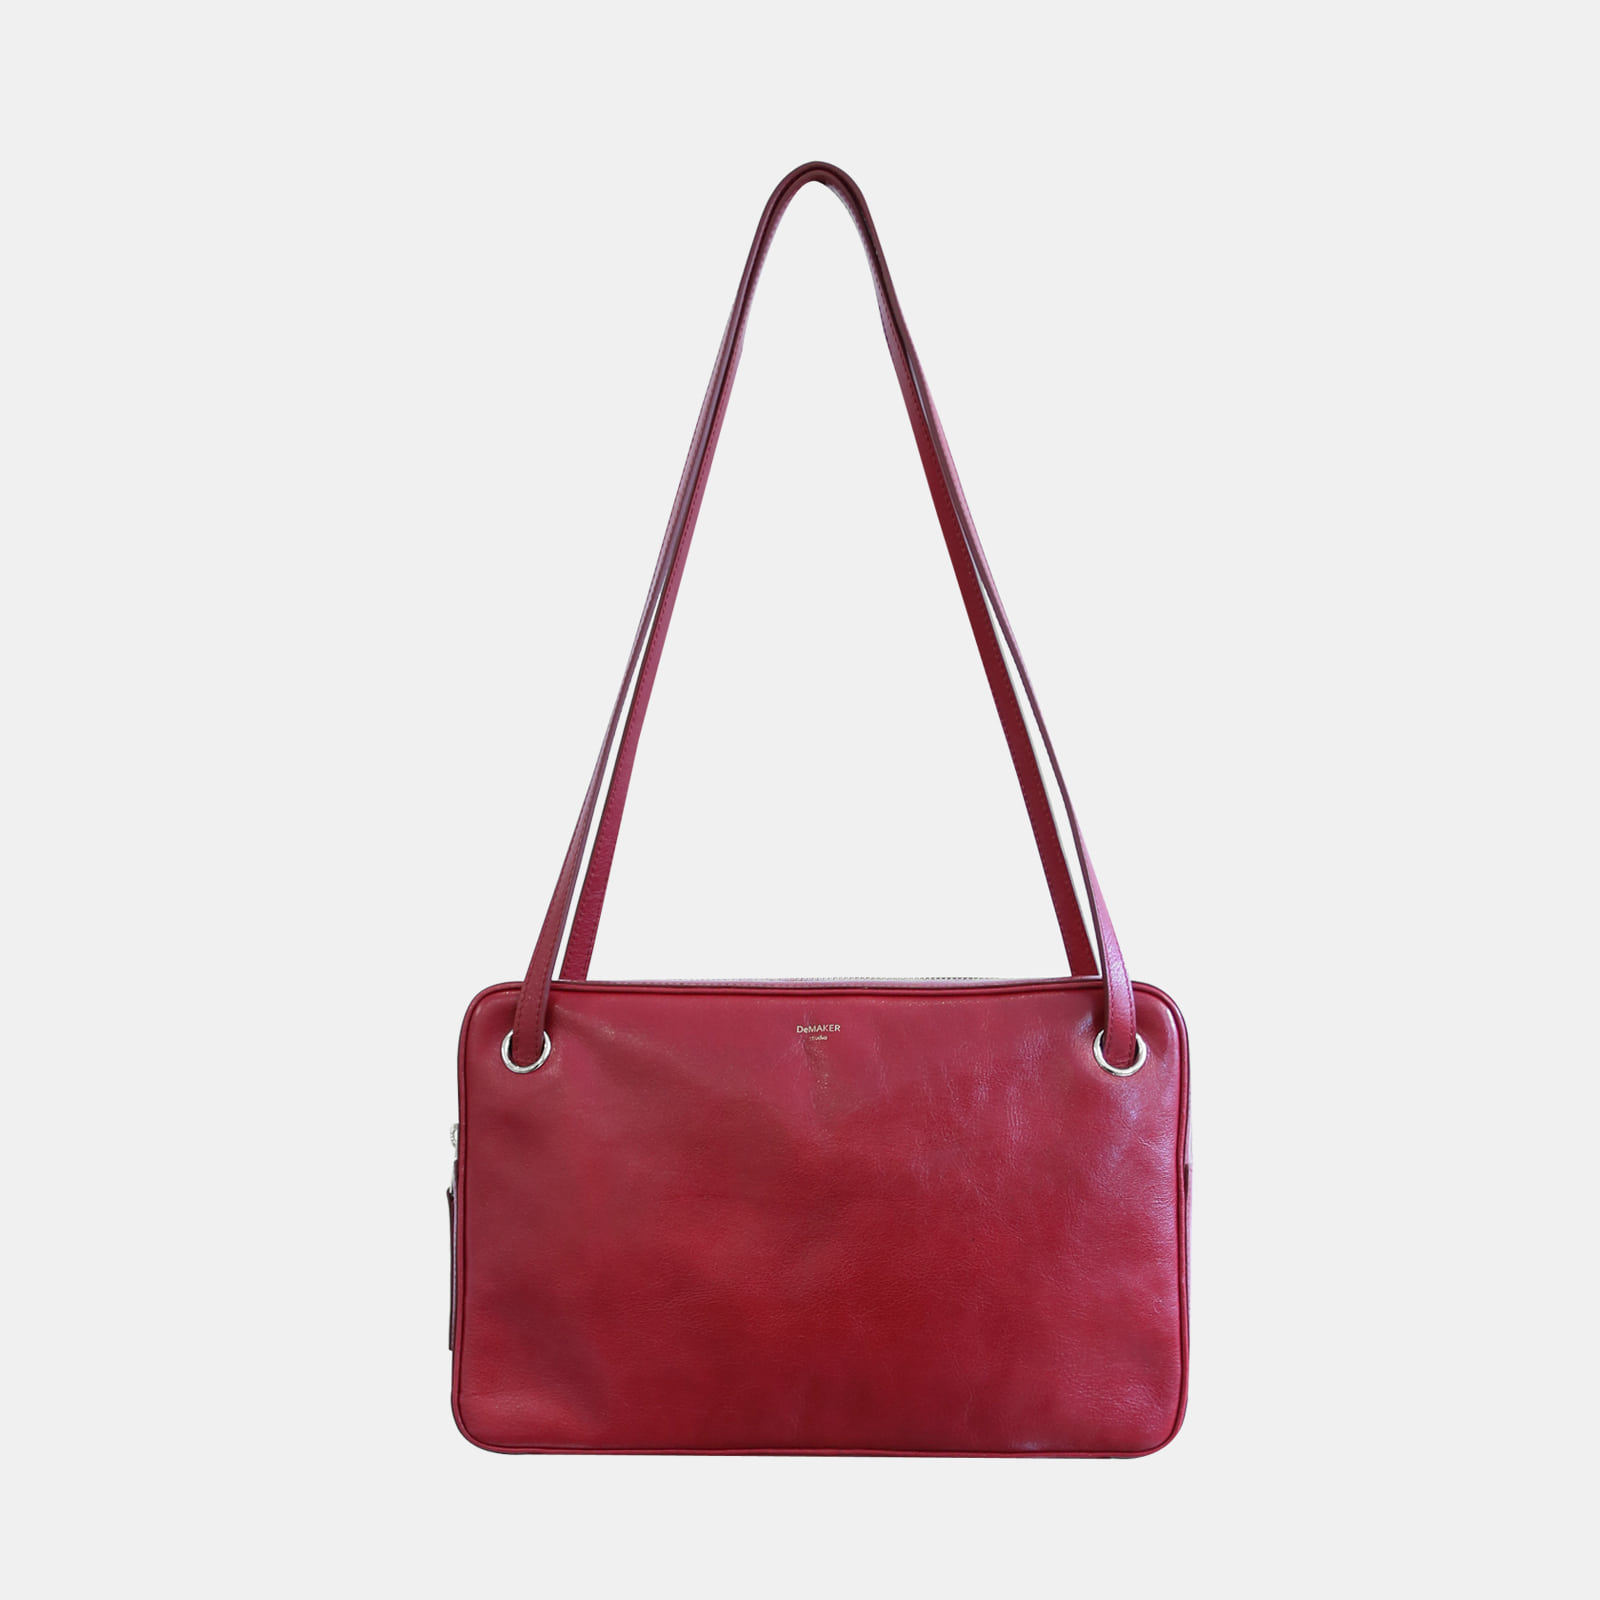 Lunch bag-red